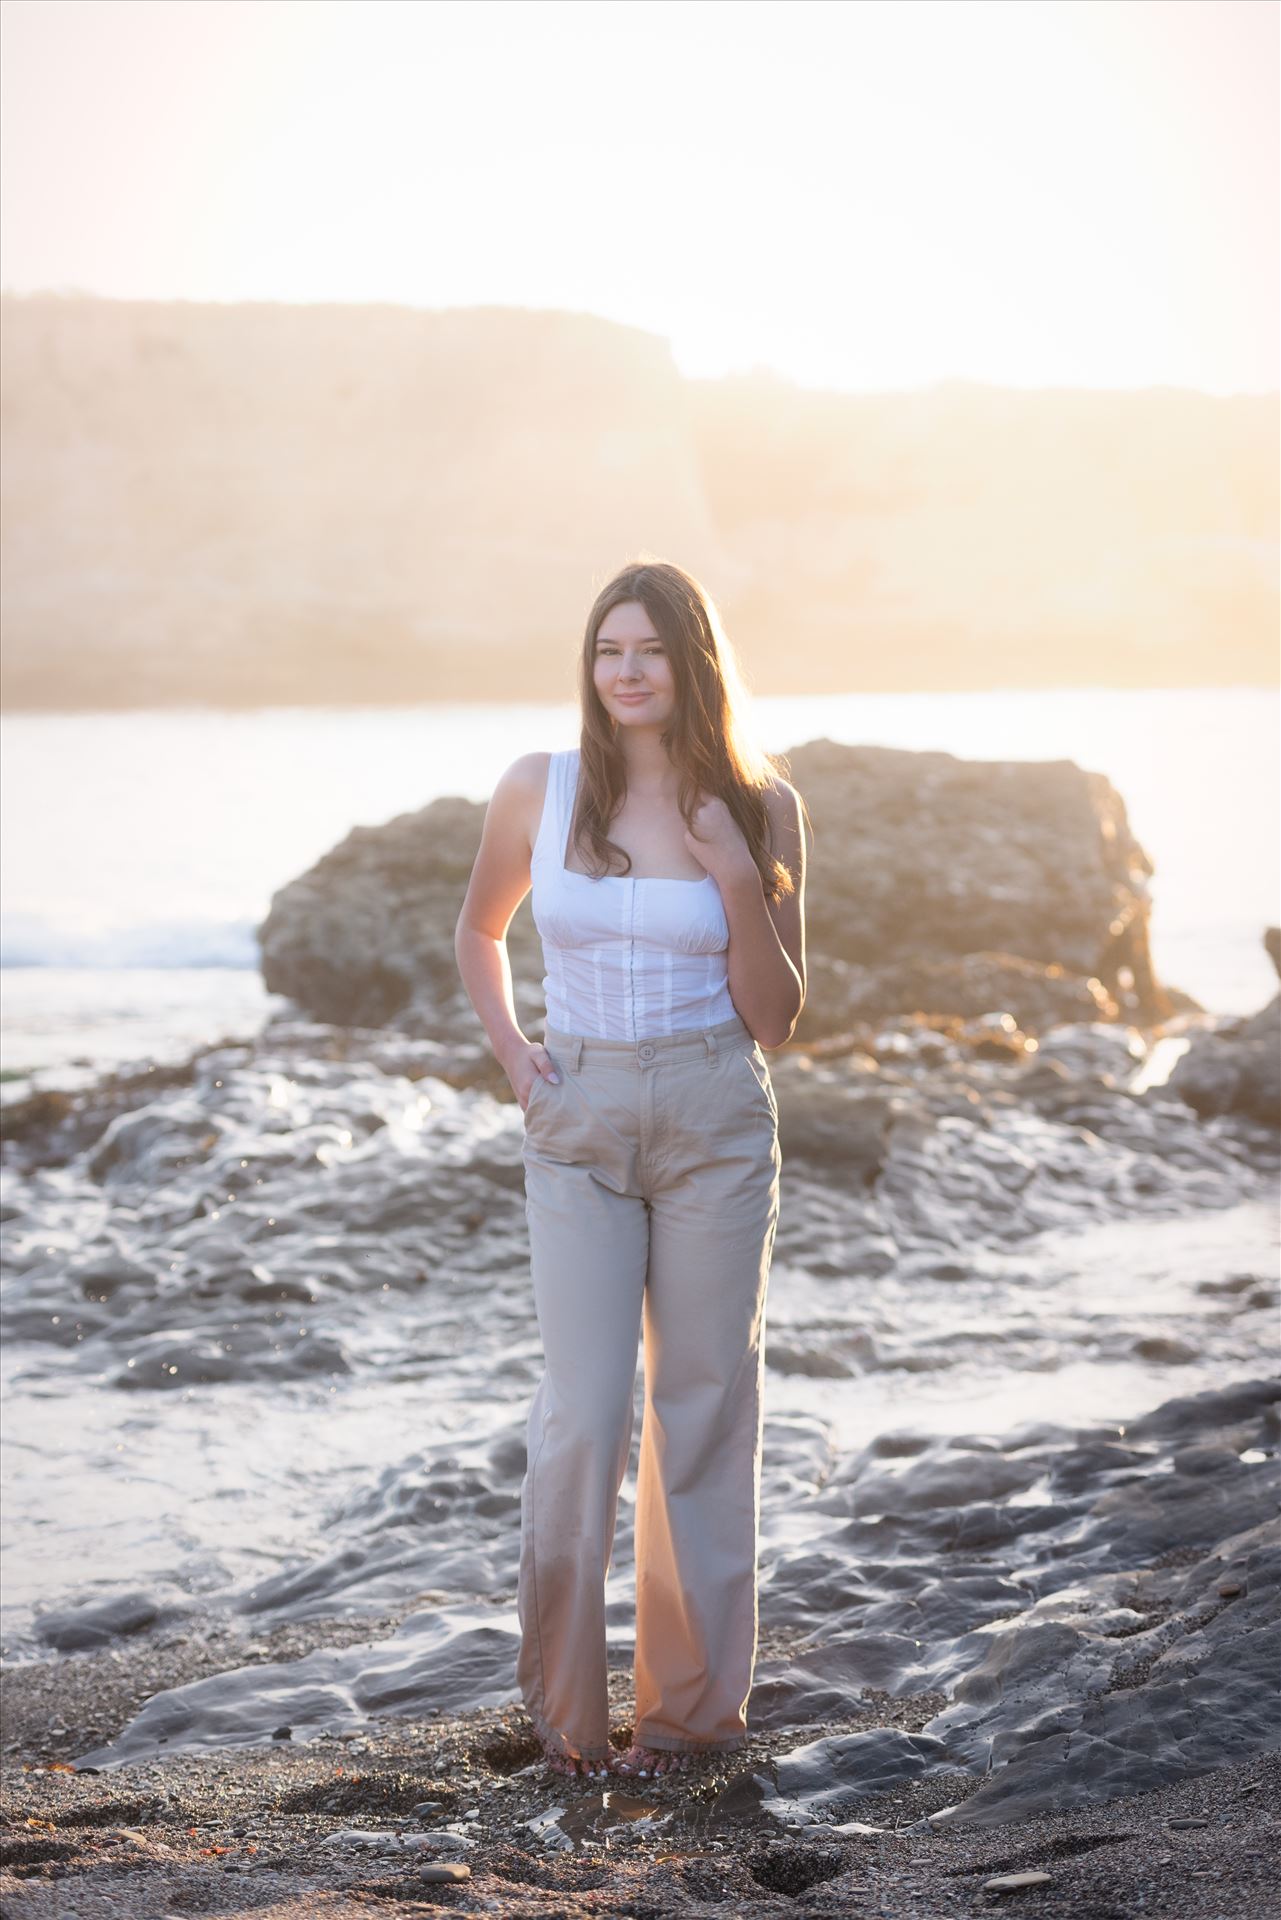 Final-9086.JPG - Mirror's Edge Photography a San Luis Obispo Luxury Portrait, Wedding and Engagement Photographer capture Hayley's Senior Portrait Session at Montana de Oro.  Hayley sunflare with water. by Sarah Williams